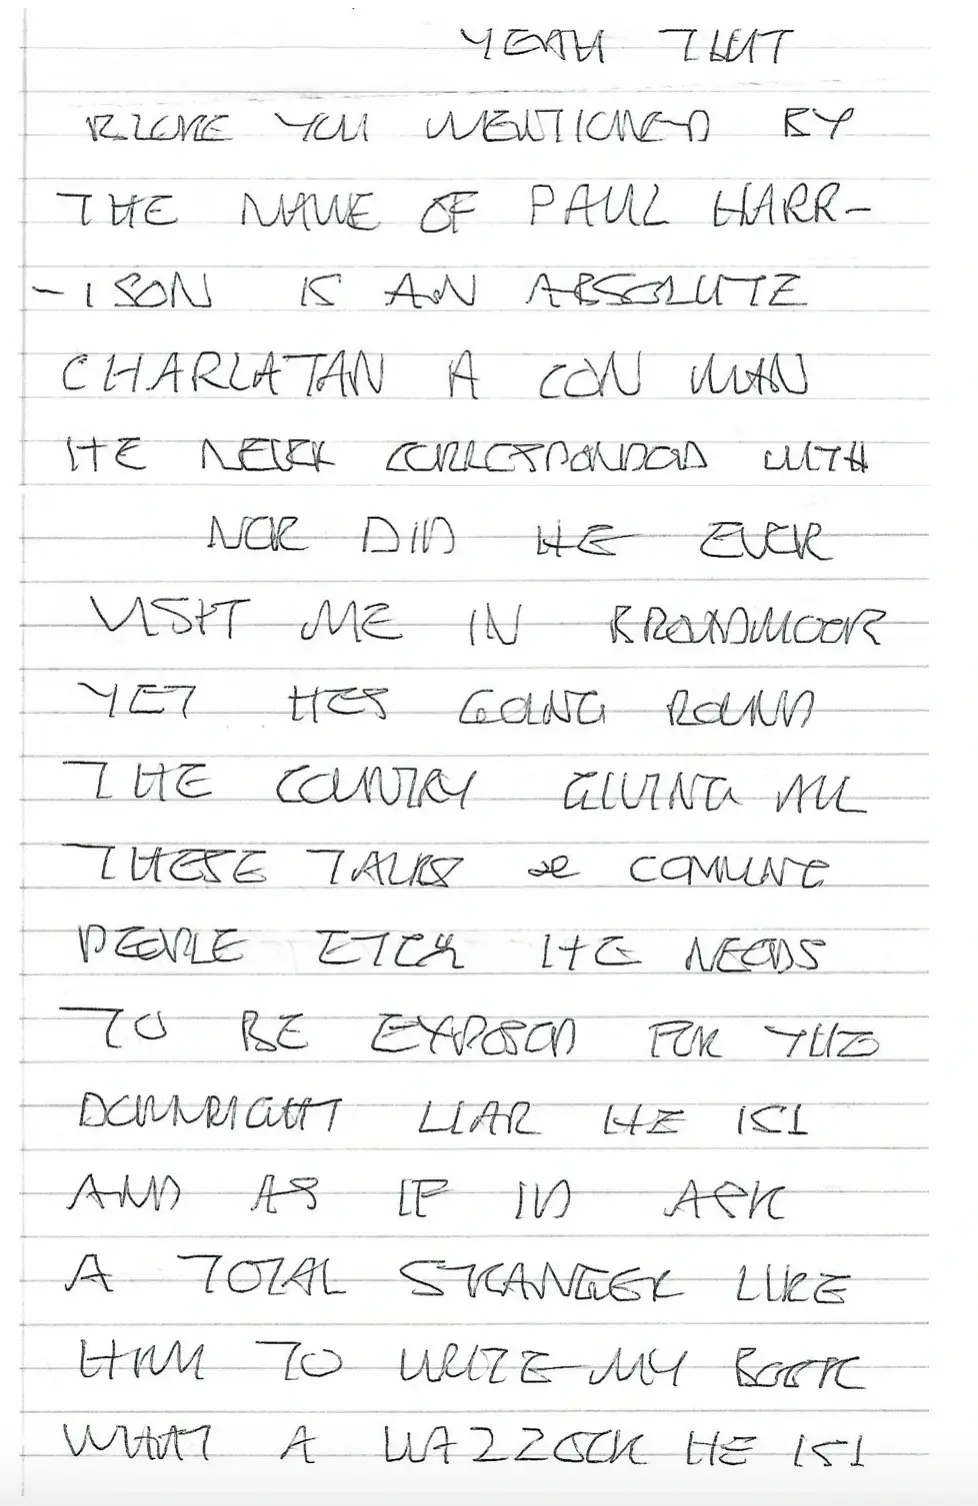 Yorkshire Ripper Letter To The Press